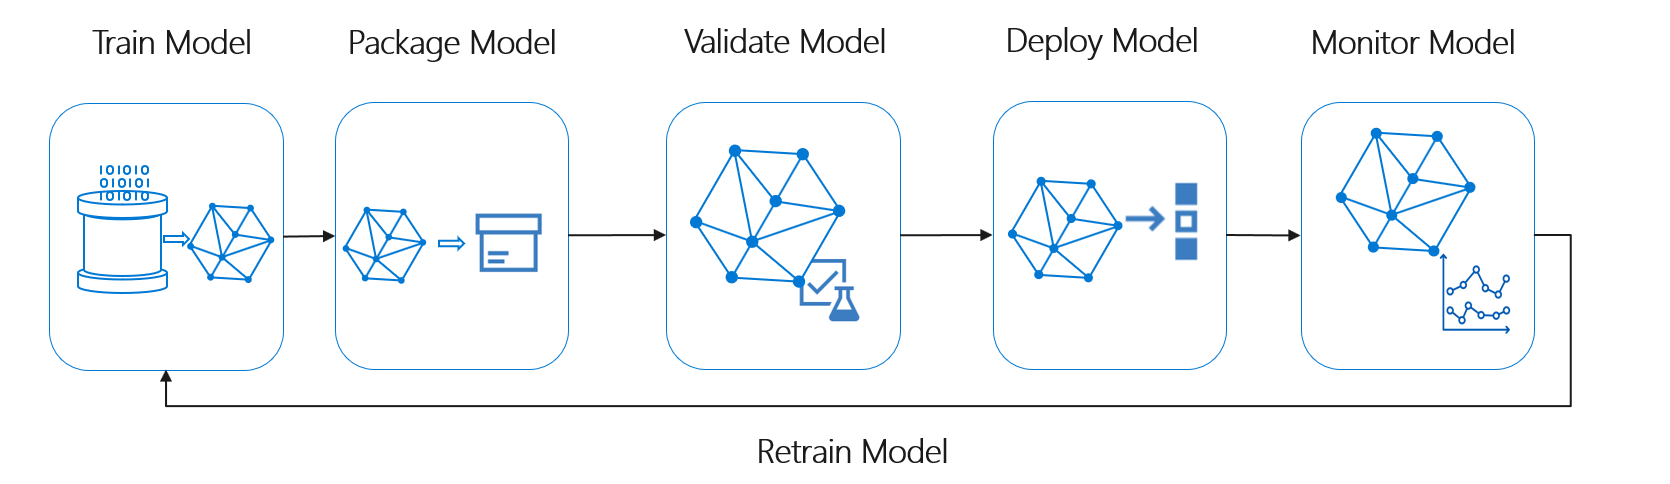 Machine Learning Operations Mlops Framework To Upscale Machine Learning Lifecycle With Azure